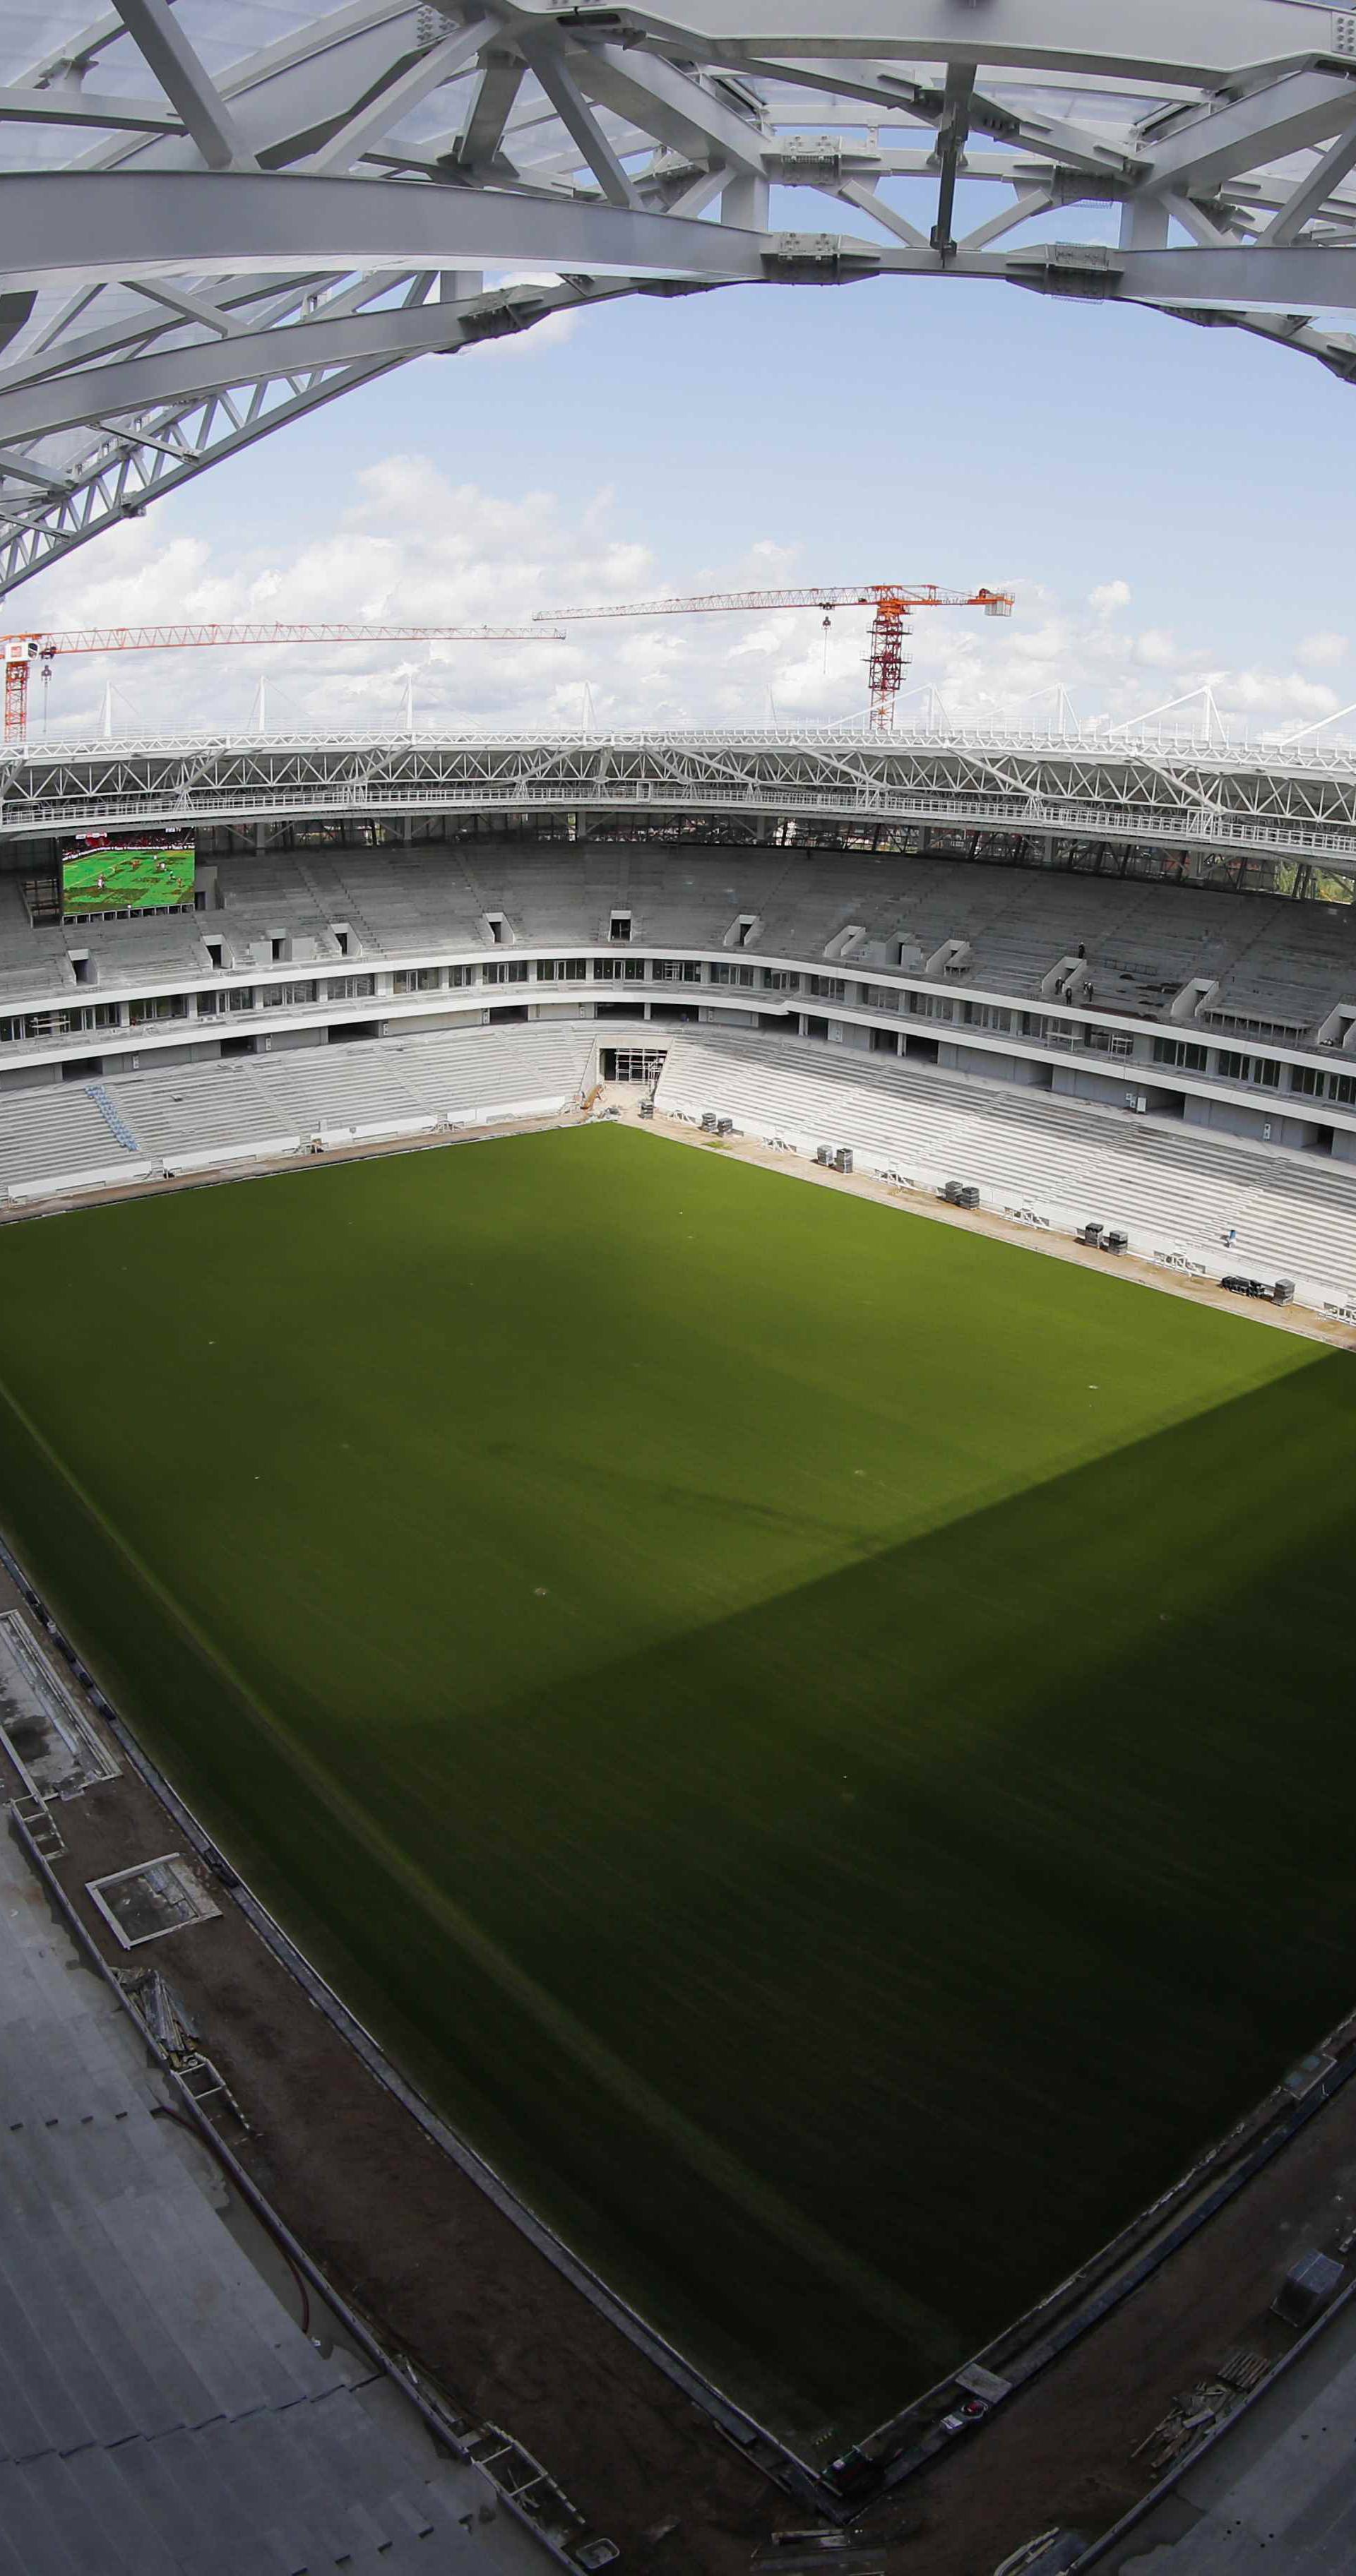 FILE PHOTO: A general view shows Kaliningrad Stadium, the arena under construction which will host matches of the 2018 FIFA World Cup in Kaliningrad